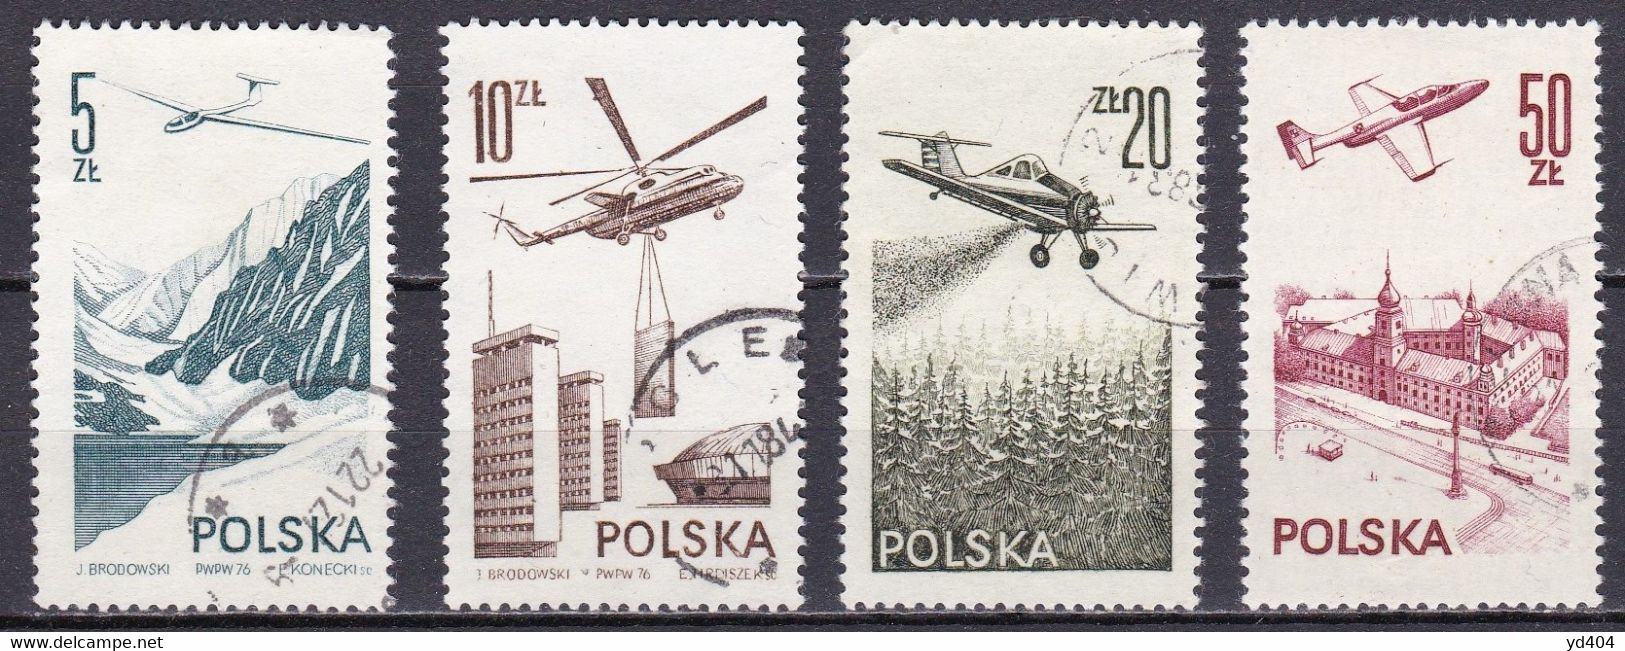 PL309 – POLAND – AIRMAIL – 1976-78 – CONTEMPORARY AVIATION - Y&T # 55/8 USED 3,30 € - Usados